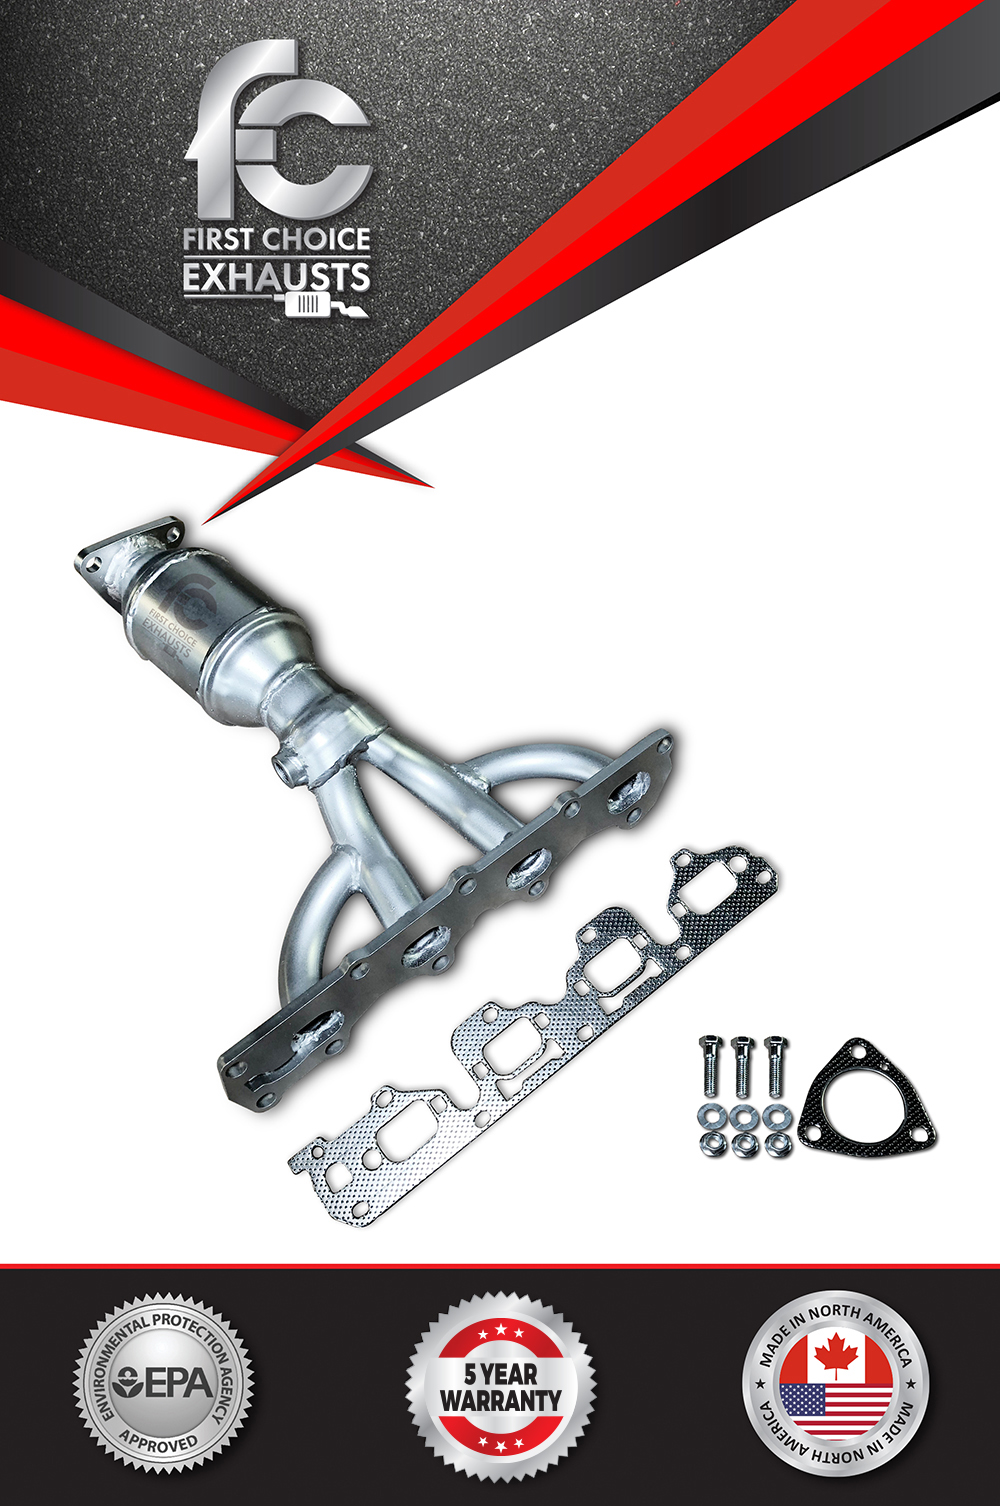 First Choice Exhaust Inc. | car repair | 1744 Midland Ave Unit 3, Scarborough, ON M1P 3C2, Canada | 4167010606 OR +1 416-701-0606